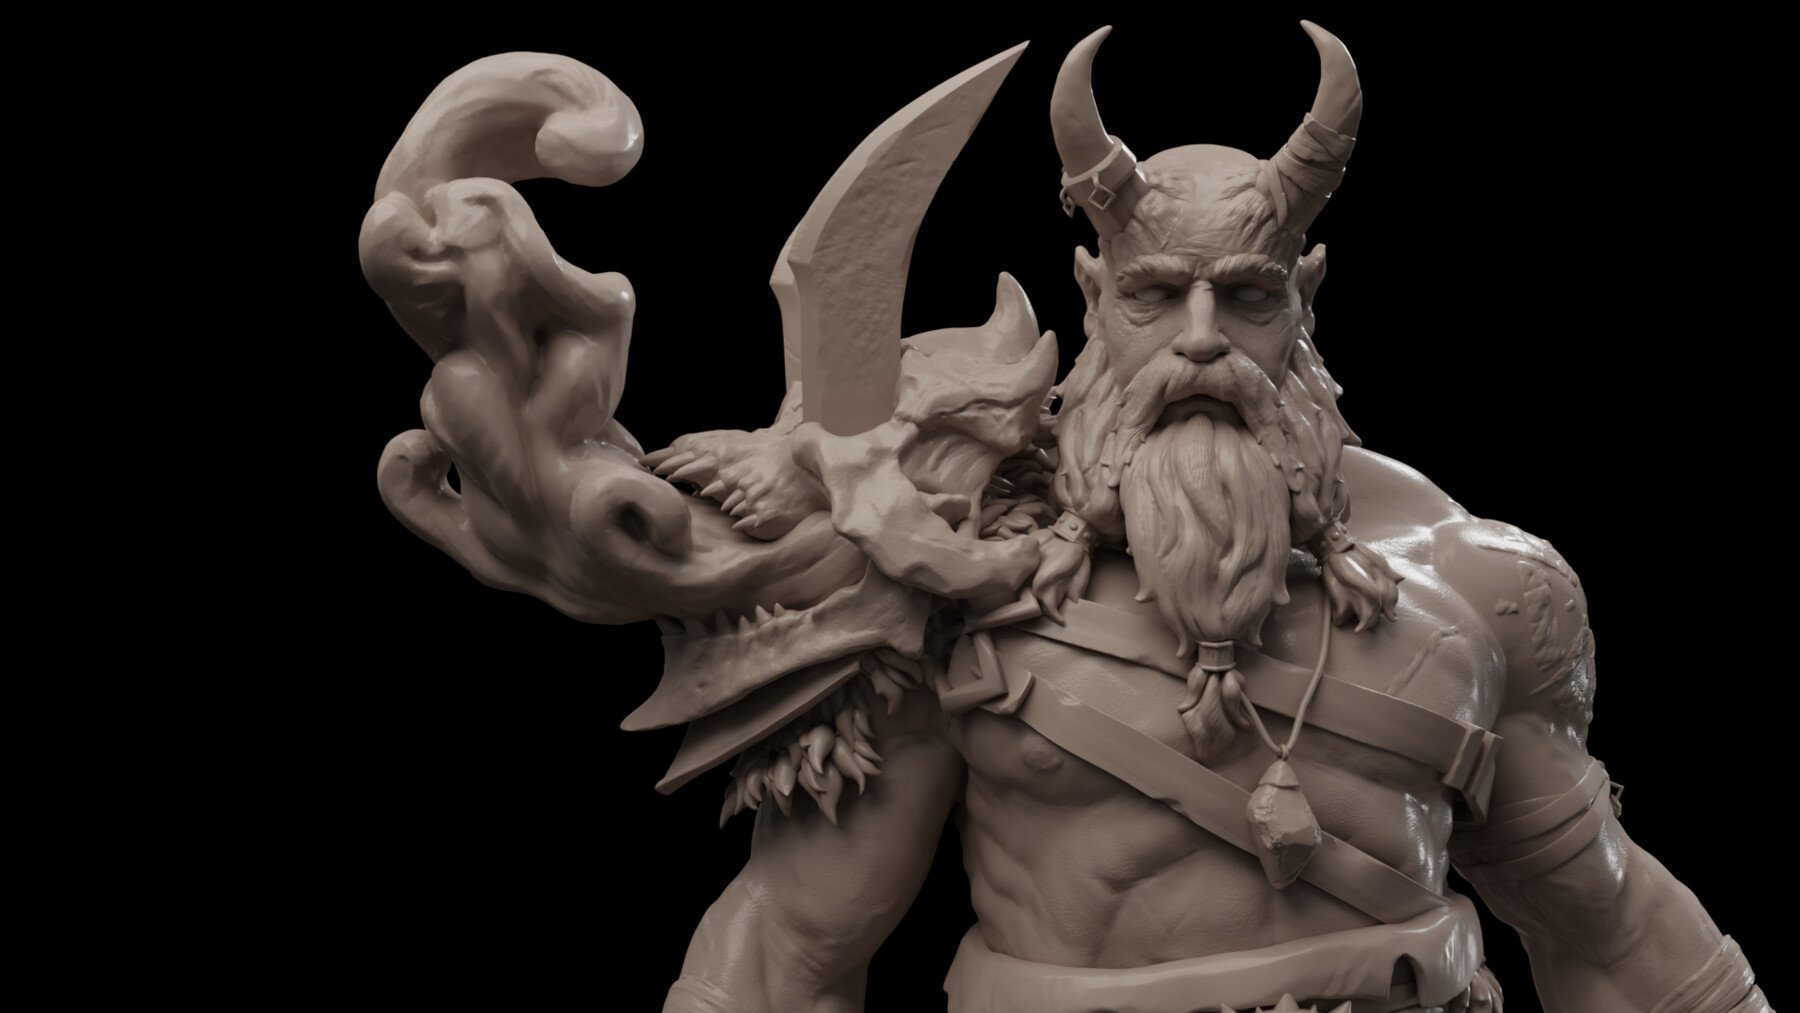 zbrush for character artists by abraham leal